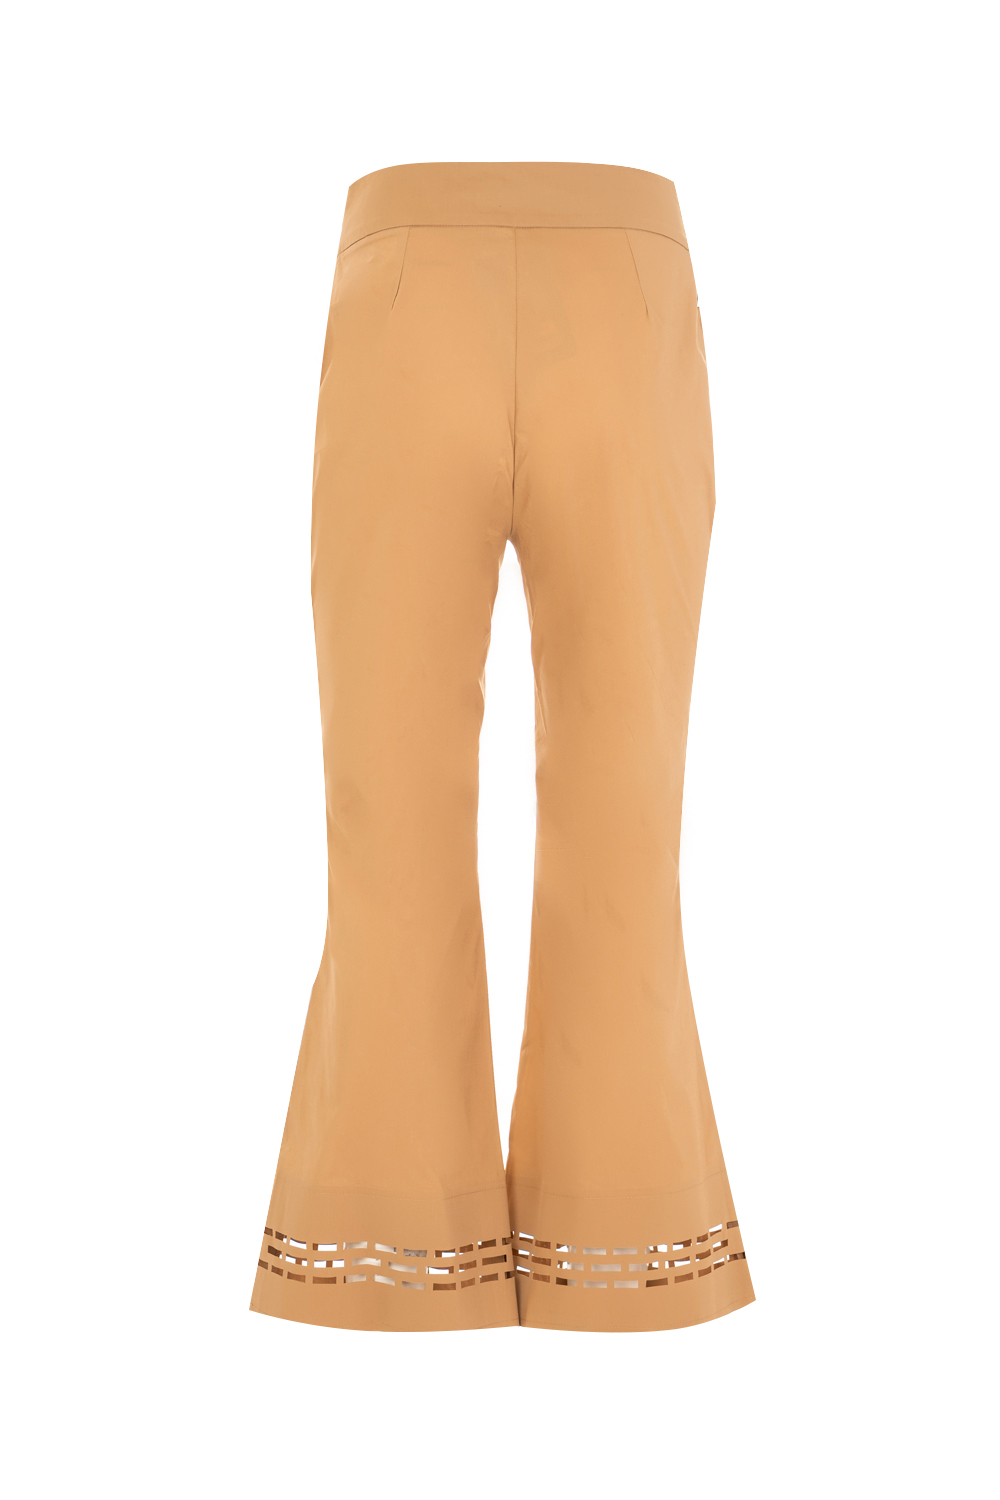 High Waist 7/8 Trousers with Perforated Hem Detail